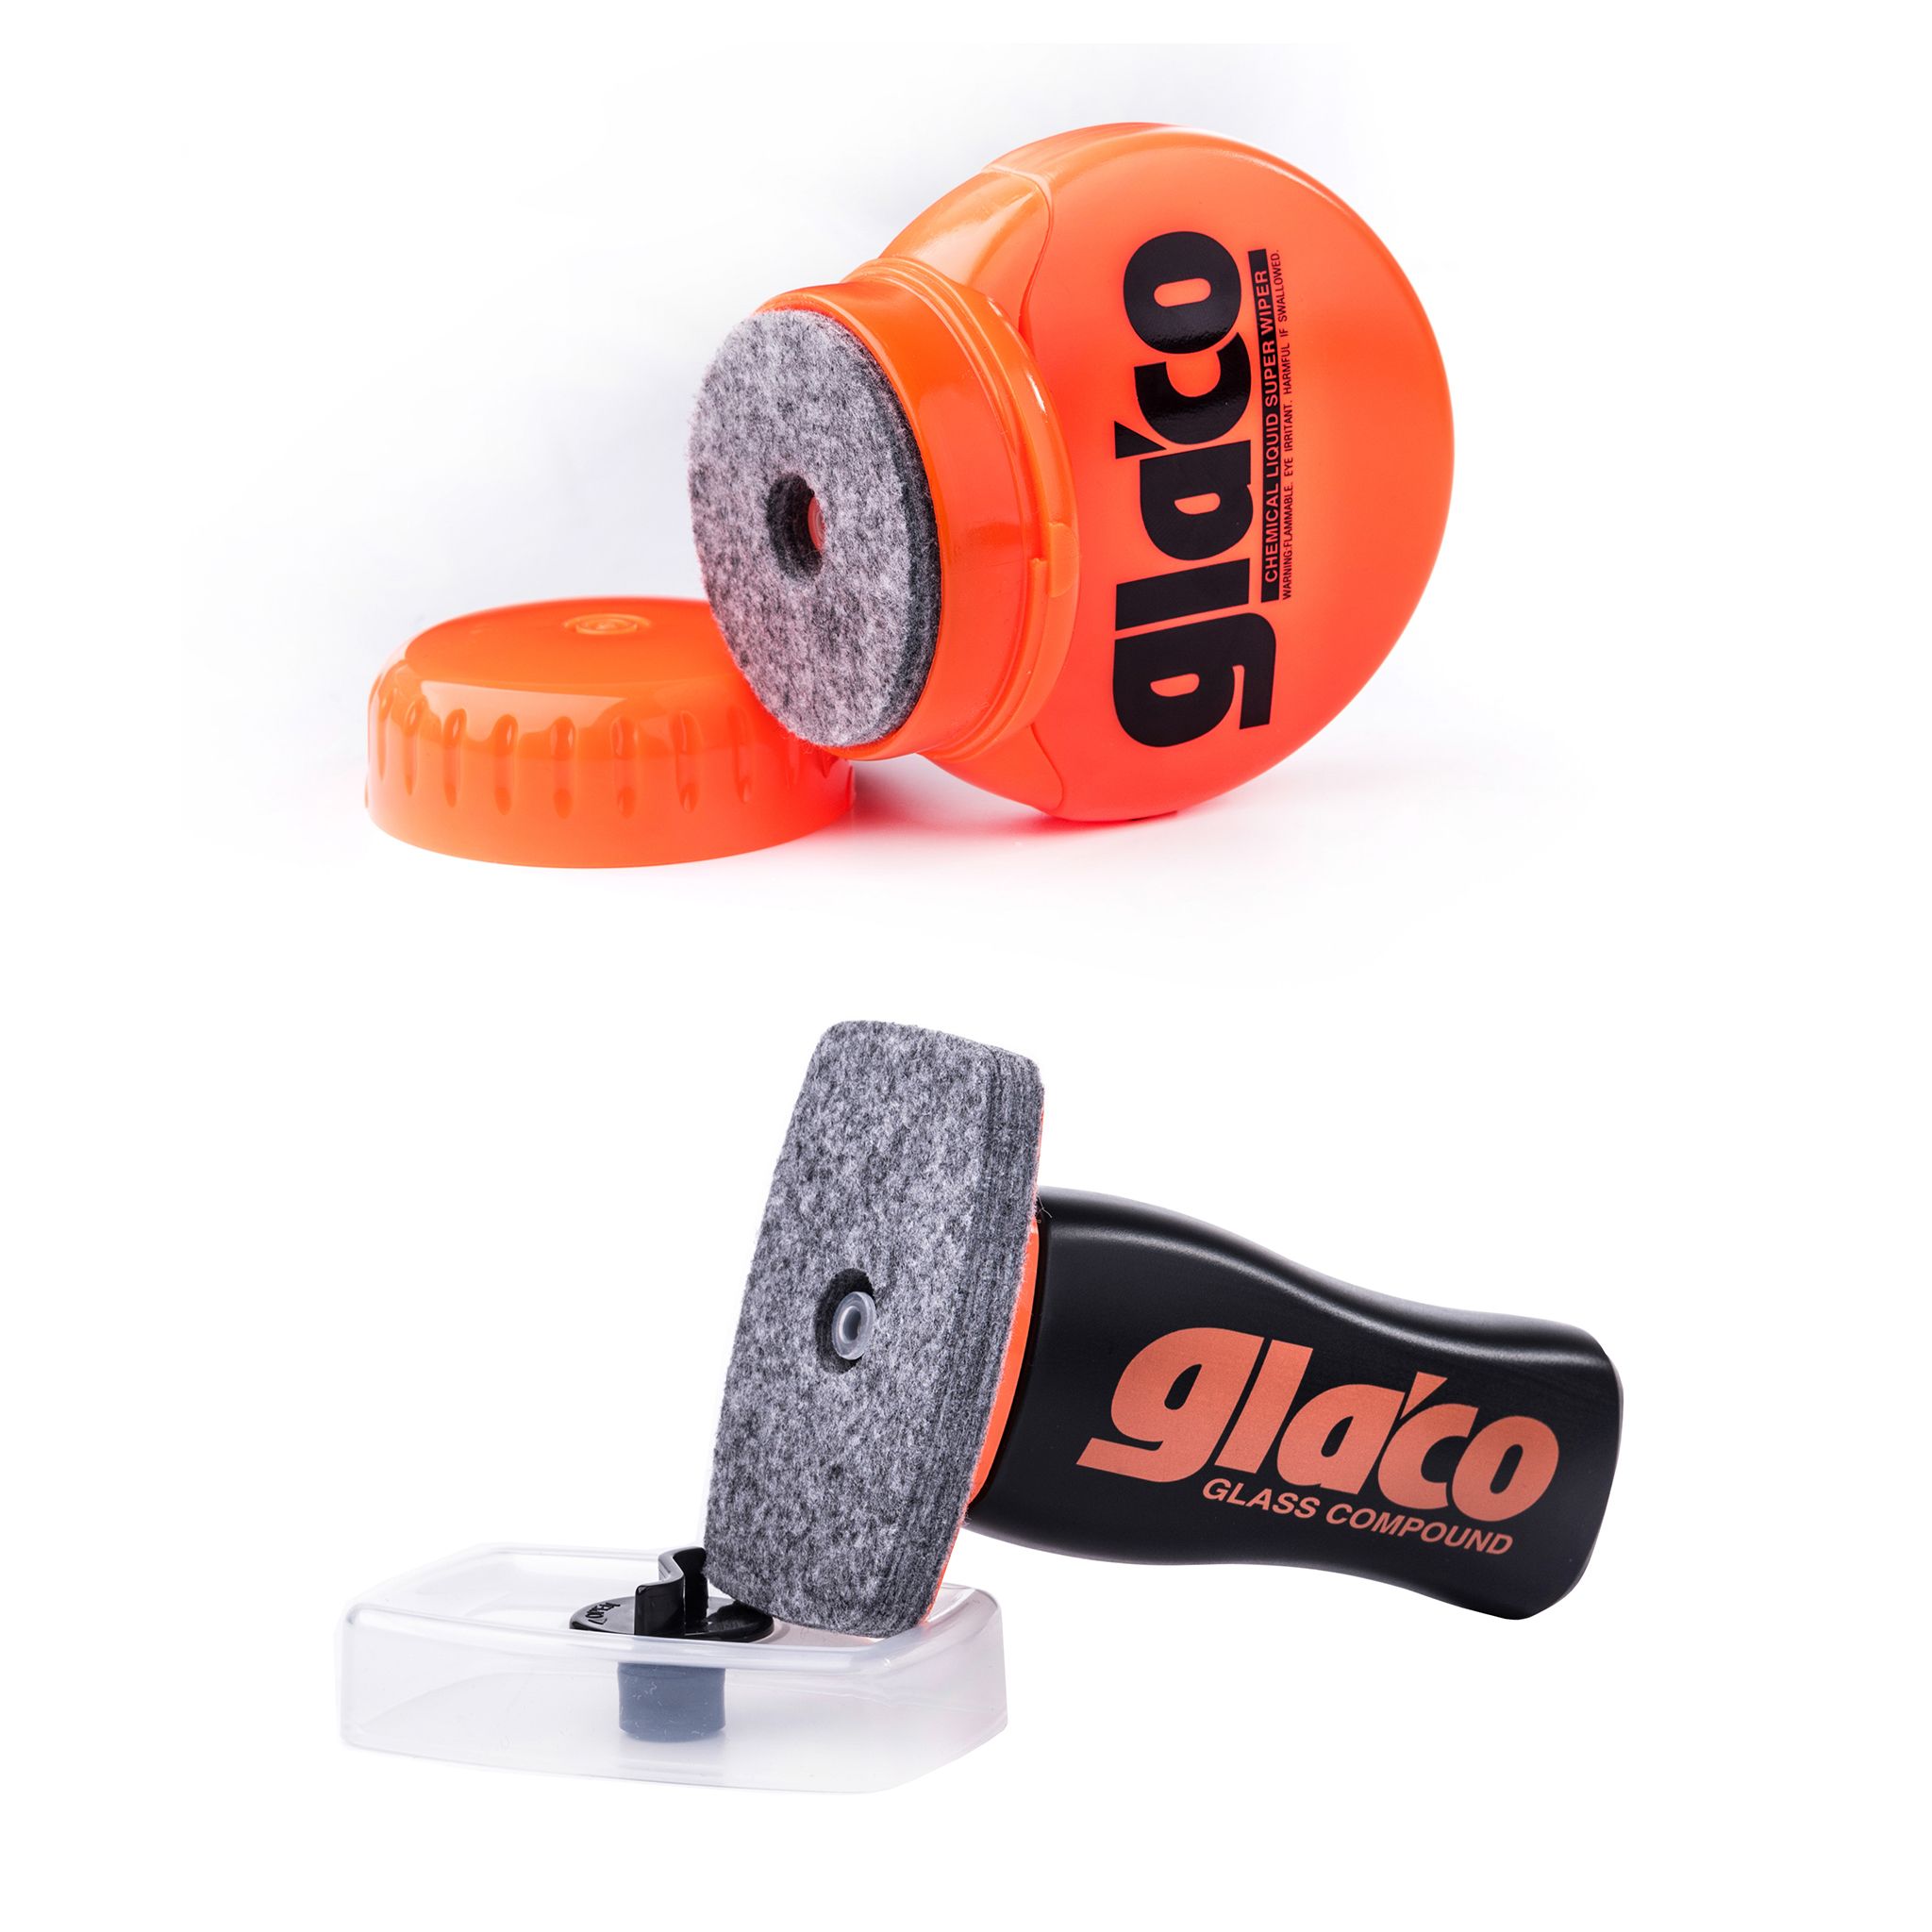 Glassforsegling Soft99 Glaco Roll On Large, 120 ml, Soft99 Glaco Roll On Large + Glaco Glass Compound Roll On